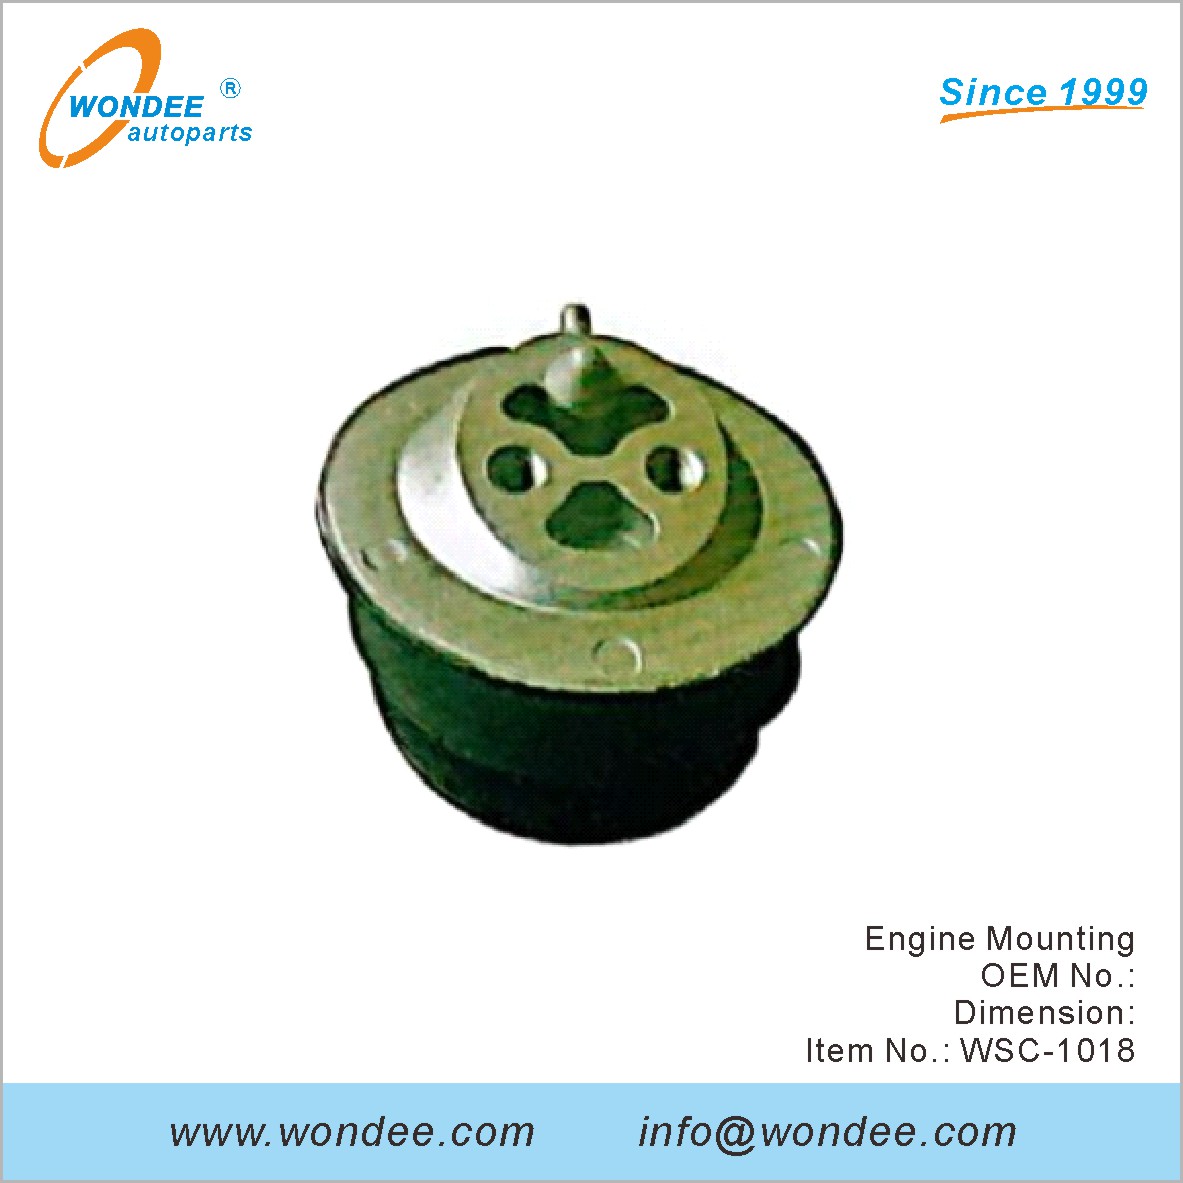 Engine Mounting OEM from WONDEE (2)